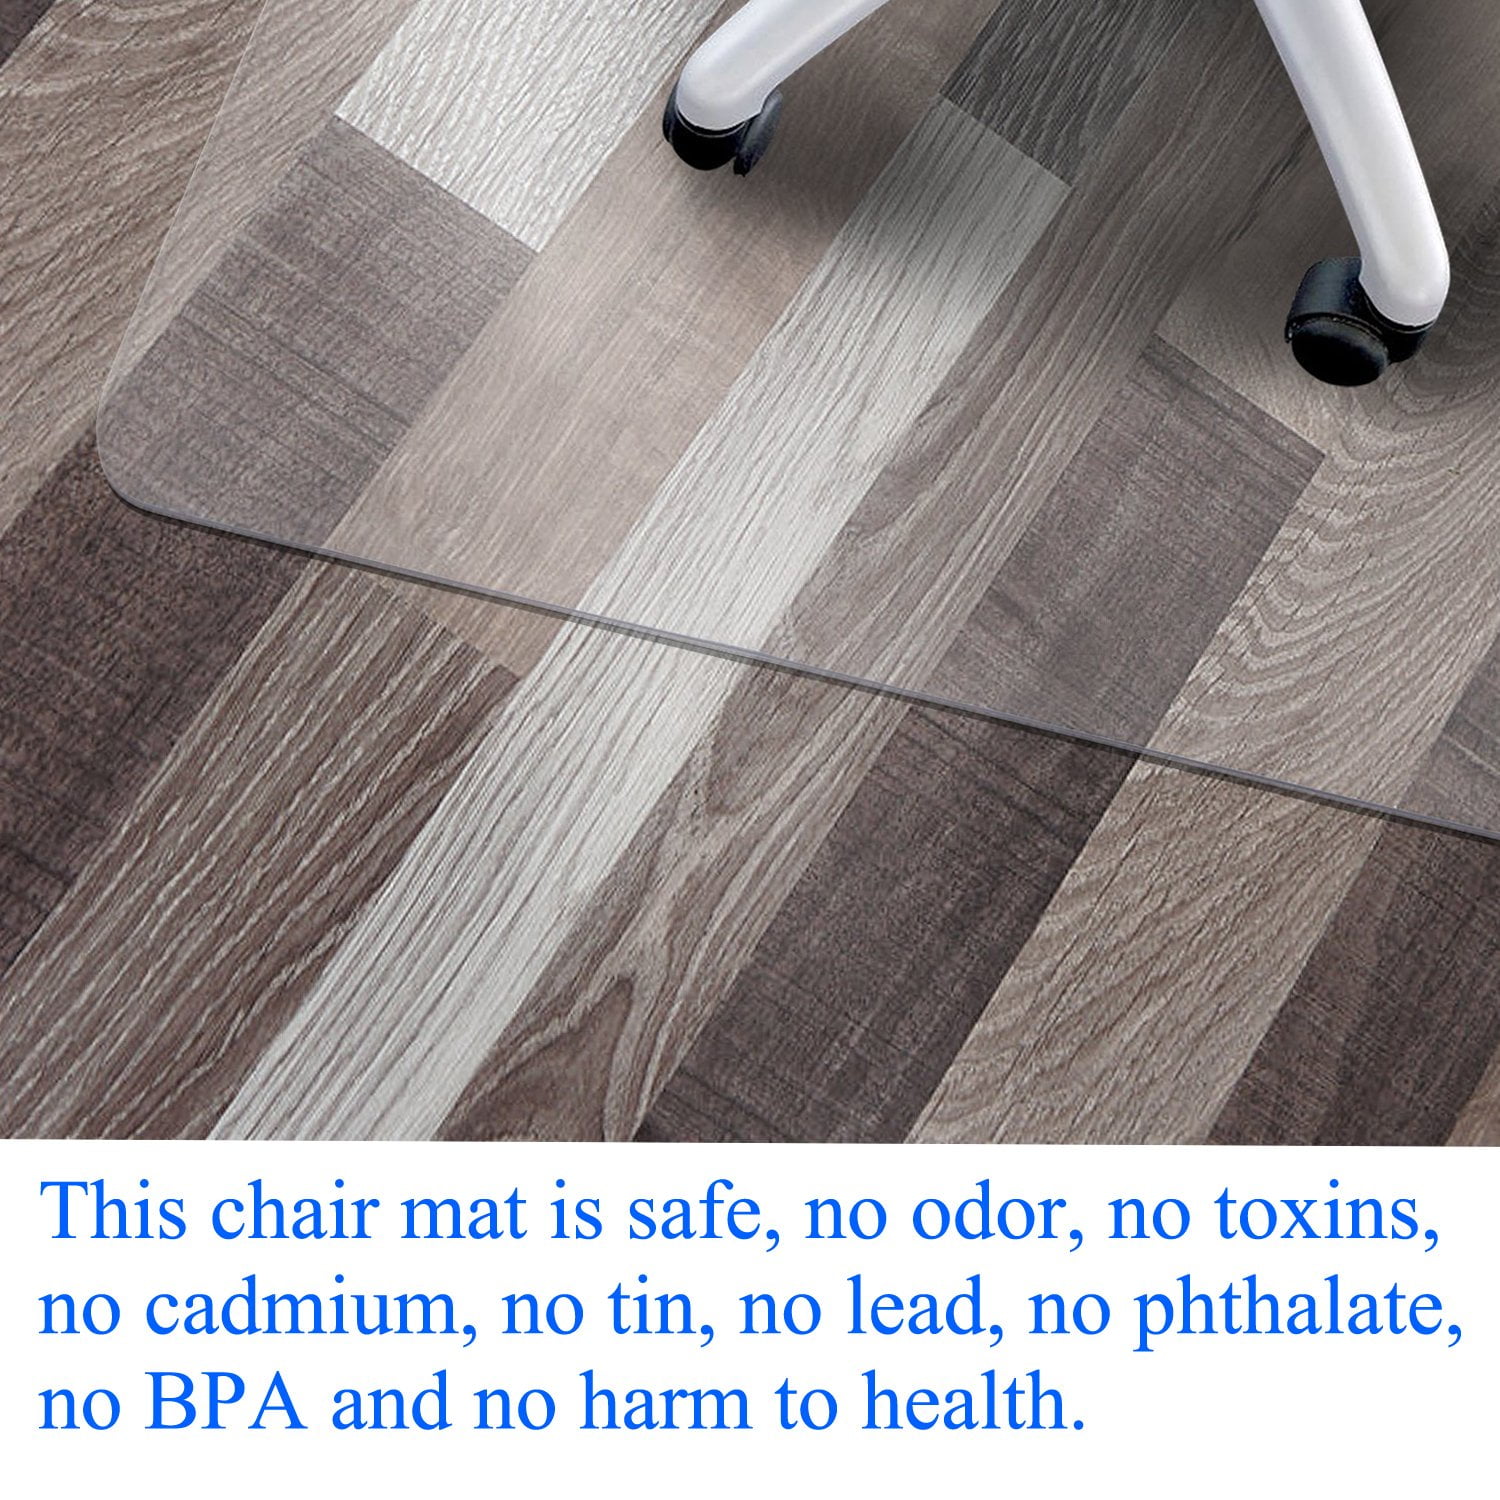 47×38“ Floor Mats Office Chair Mat Flat Without Curling Anti-Slip Pads Crystal Chair Mat 1/12 Inch Thick Office Chair Mat Protector Chair Mat for Hardwood Floor Chair Mats for Carpeted Floor 